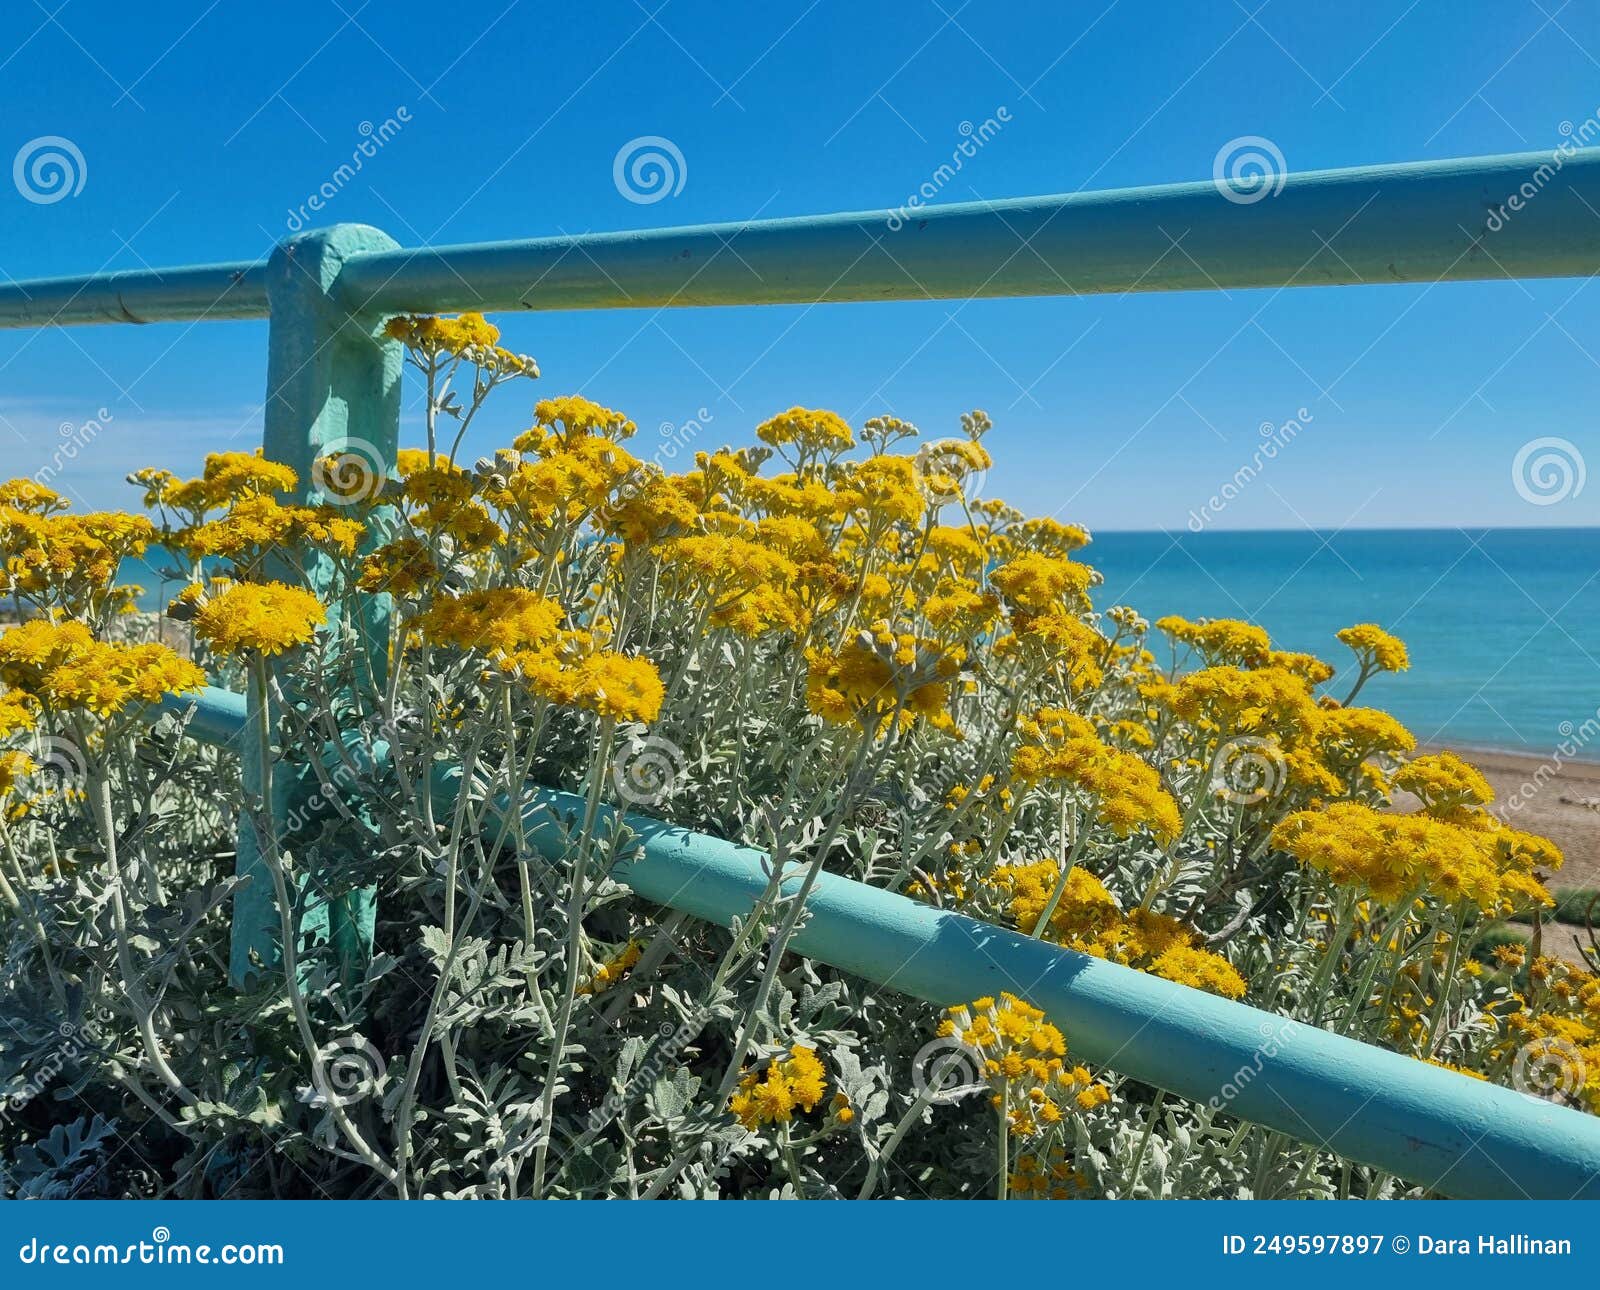 yellow flowers at a bannister by the seaside in saltdean, south england